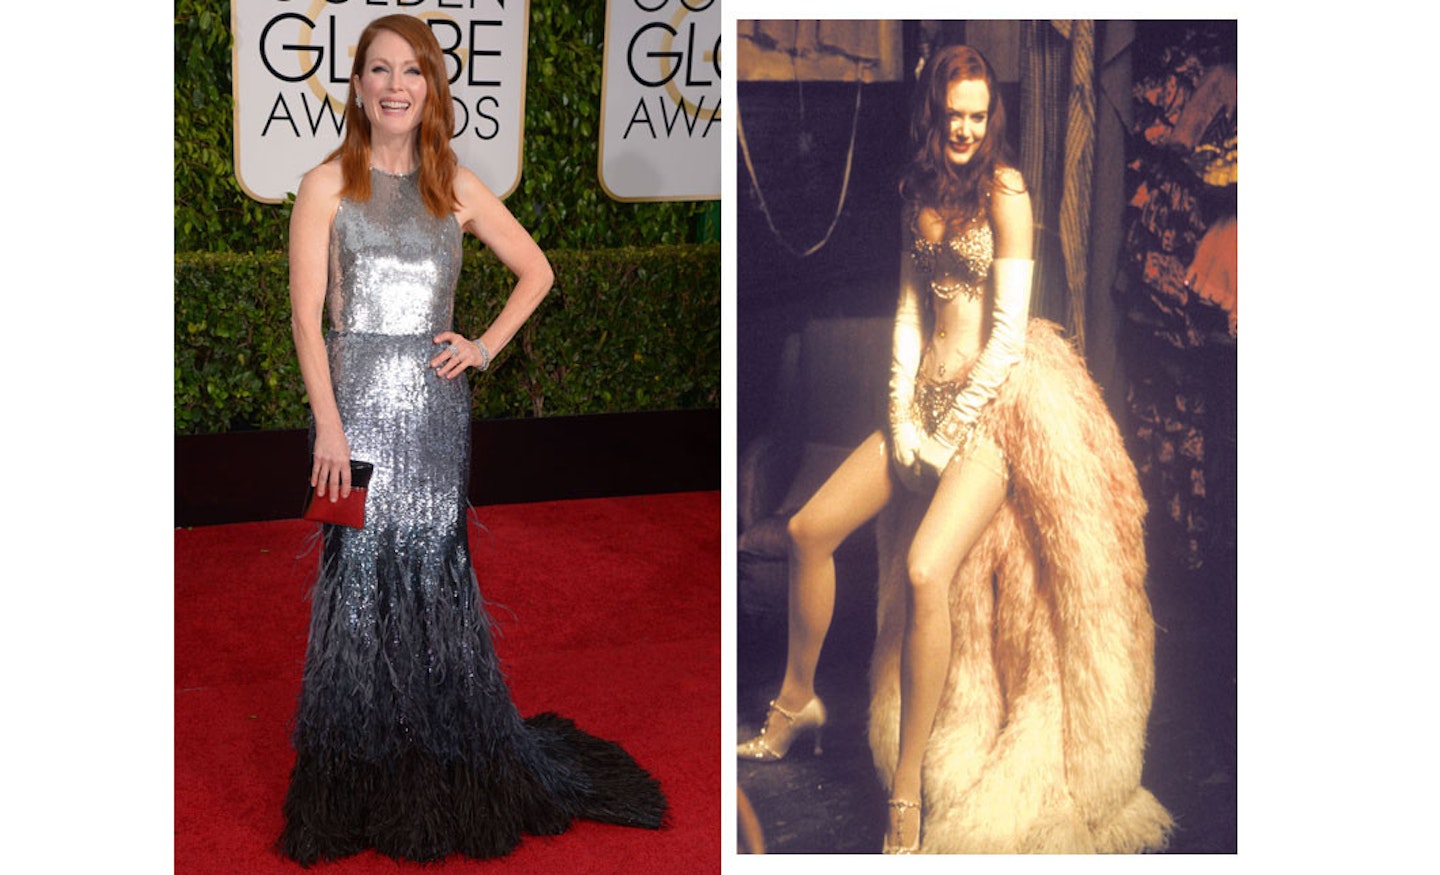 Because she can, can, CAN! Julianne Moore's feathers and sparkle mash up is V. Moulin Rouge.